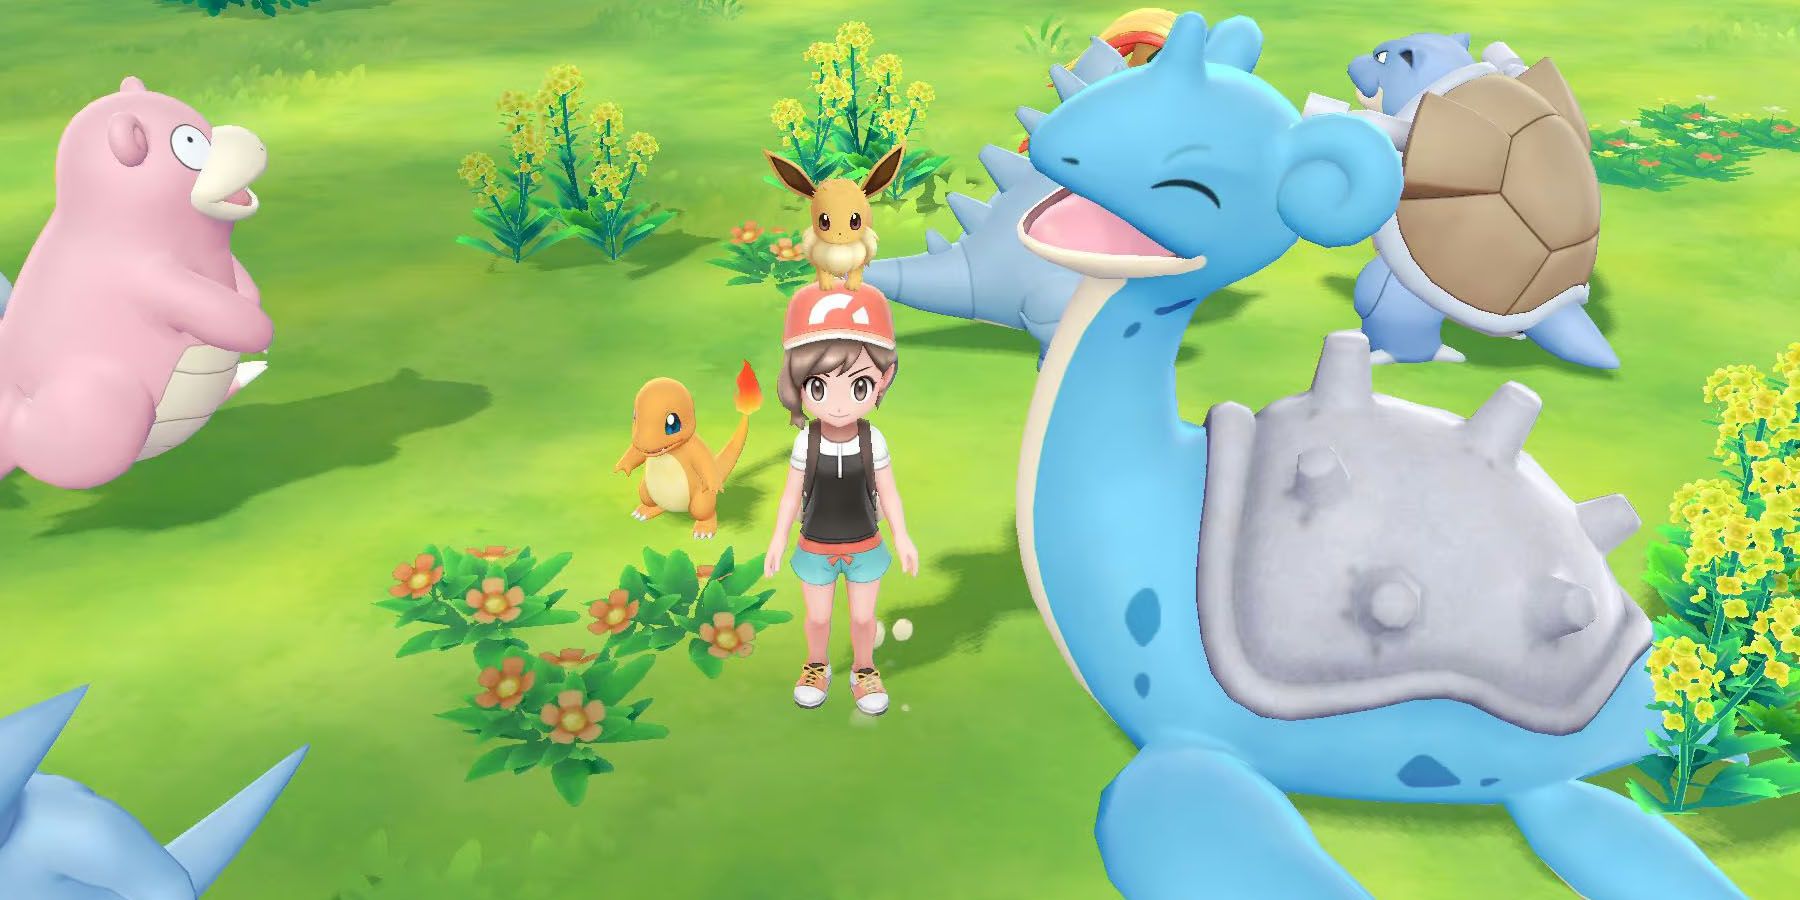 A screenshot from Pokemon Let’s Go, Eevee, featuring the player character and various Pokemon like Eevee and Laprus.